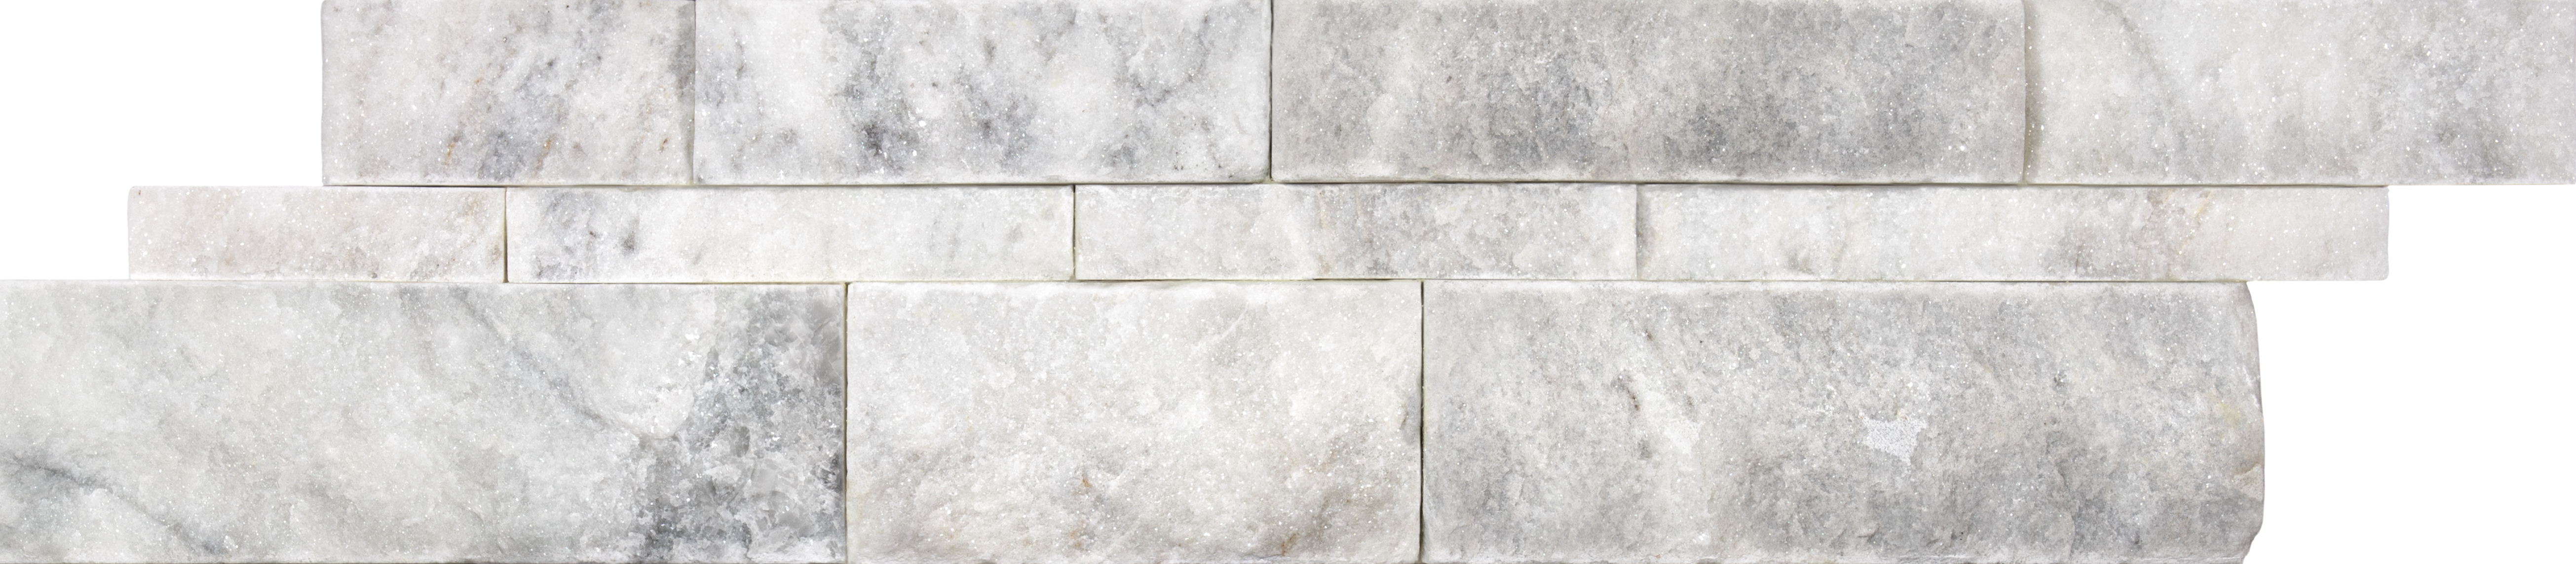 marble bianco venatino pattern natural stone wall panel from cubics anatolia collection distributed by surface group international split face finish straight edge edge 6x24 interlocking shape